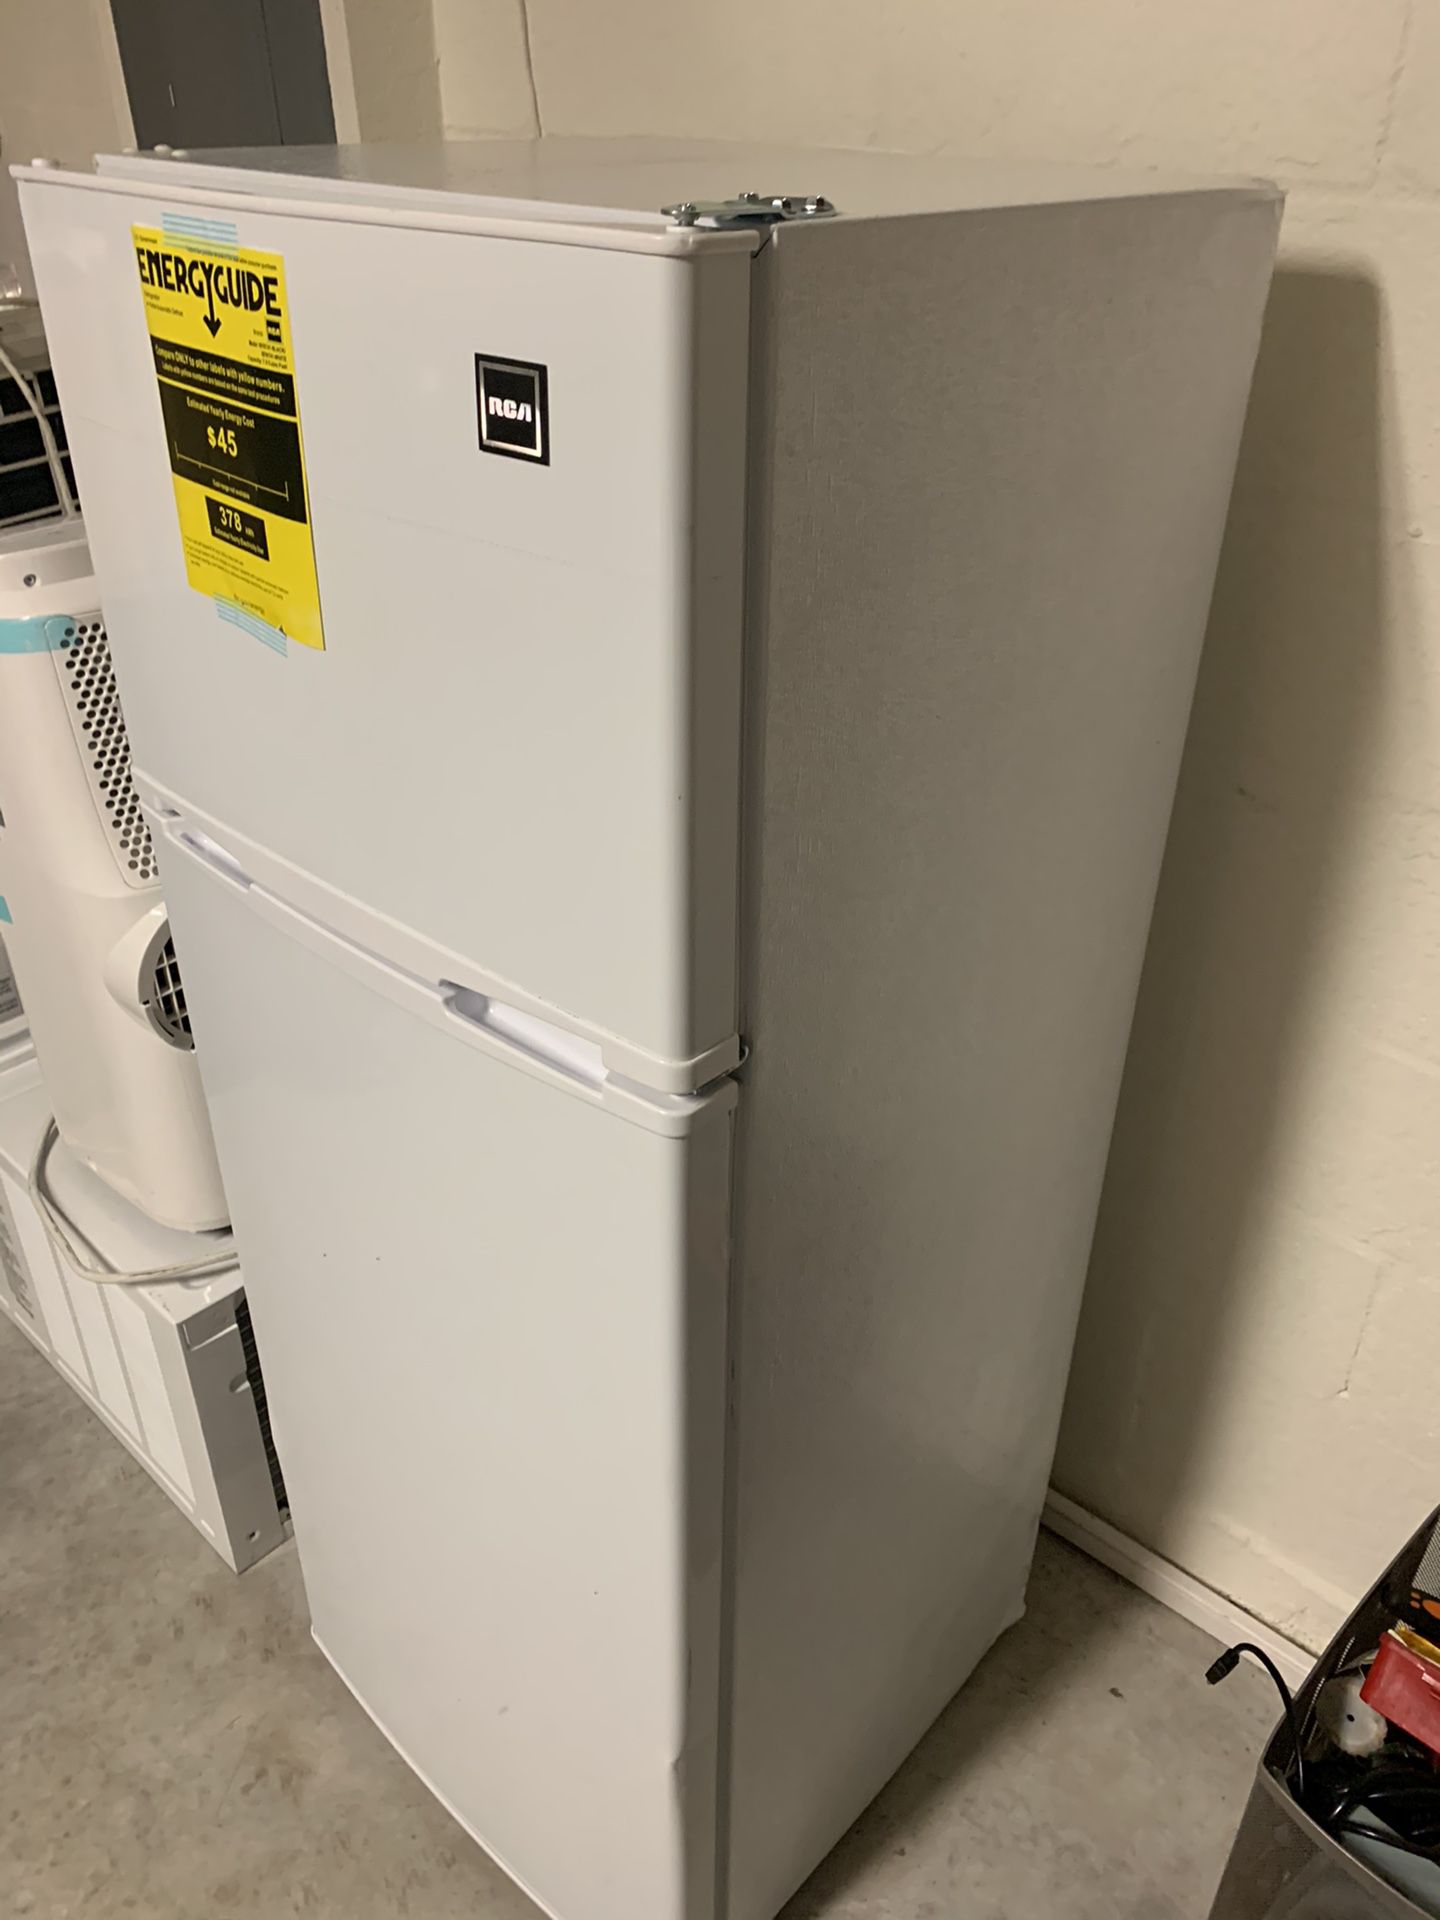 Rca refrigerator 2 door like new only have small dent size 4 f the high x 21.1/2” inch